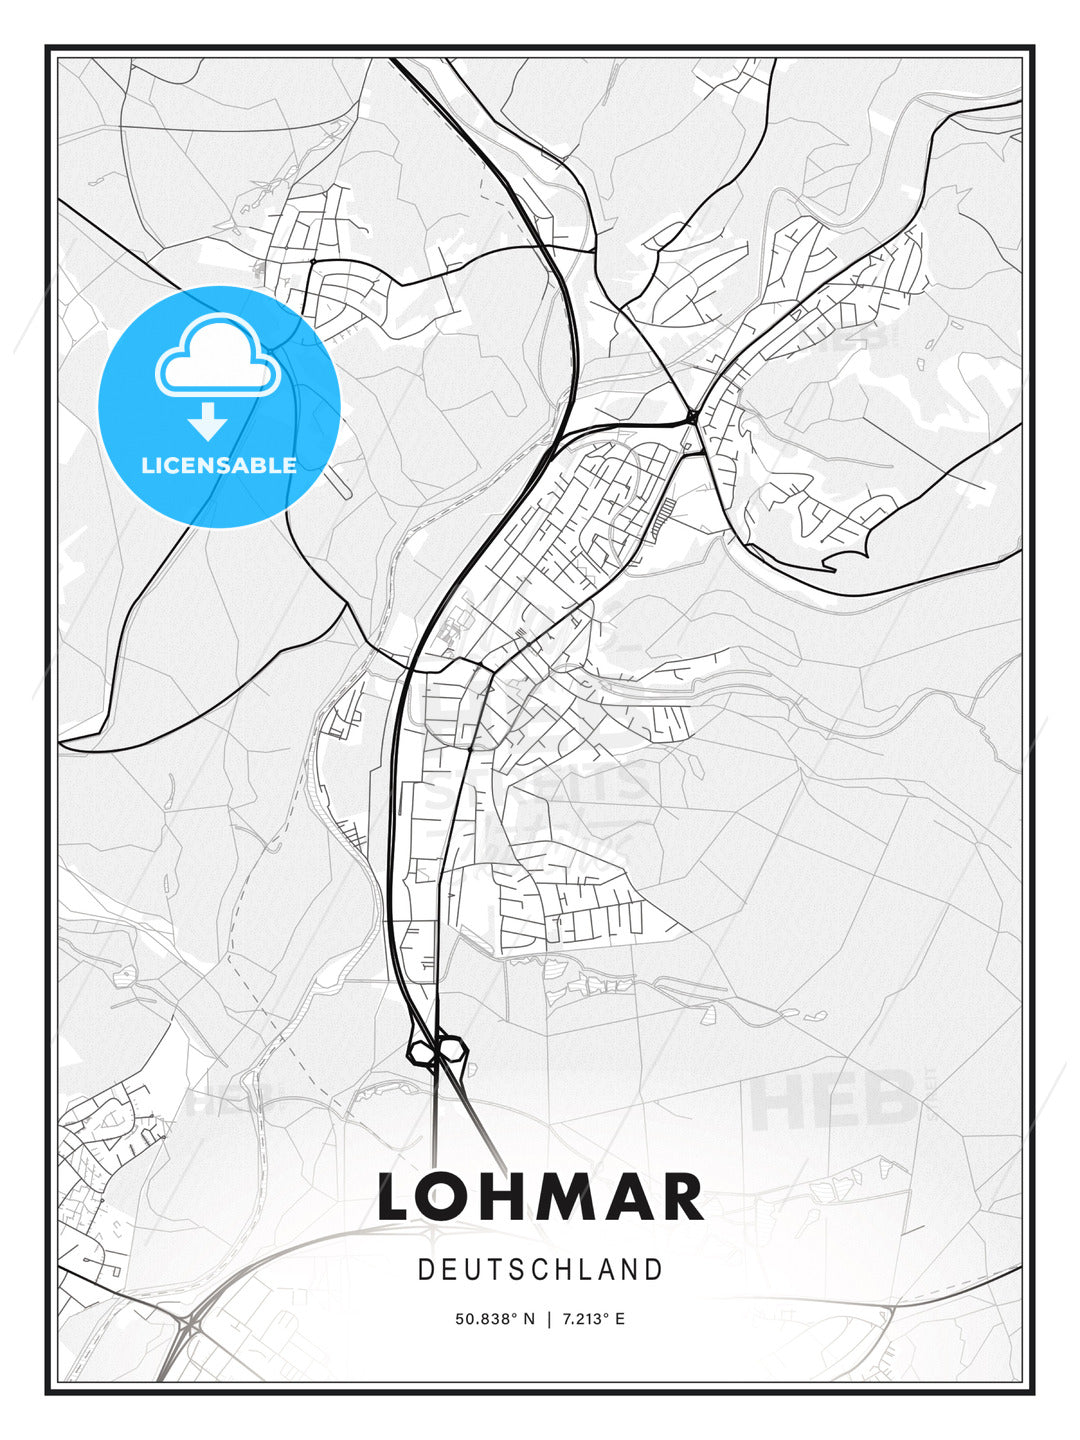 Lohmar, Germany, Modern Print Template in Various Formats - HEBSTREITS Sketches